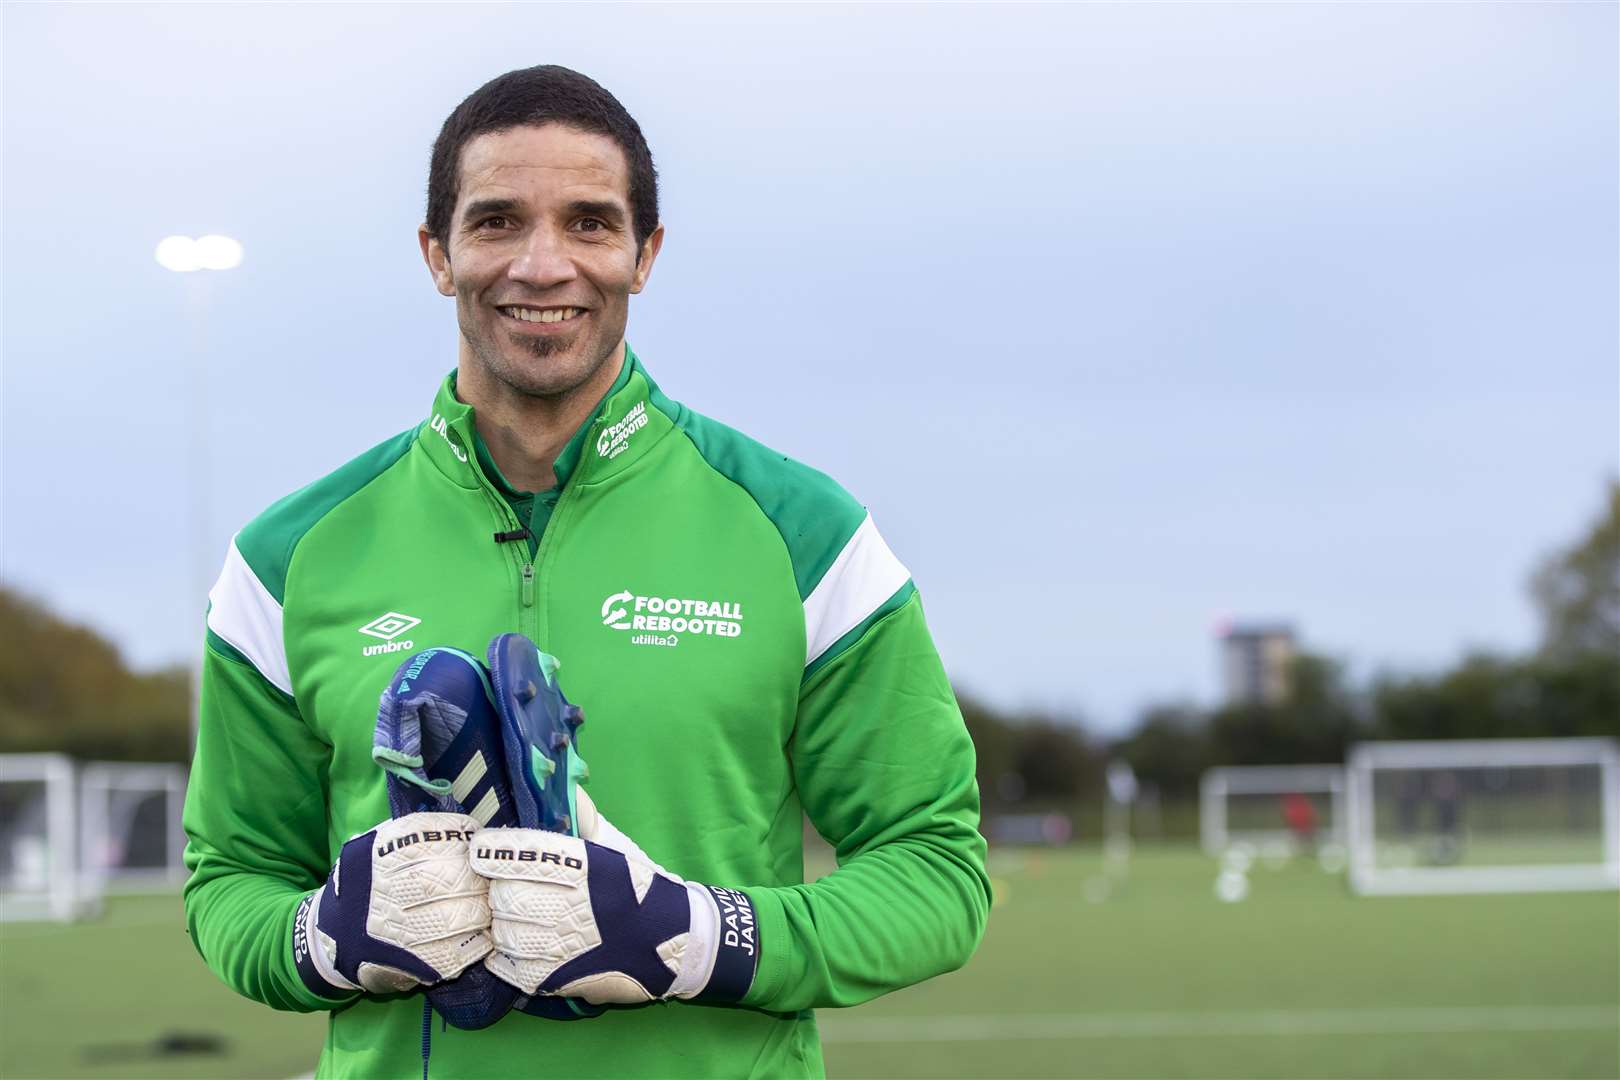 Former England goalkeeper David James MBE is an ambassador for the Football Rebooted campaign